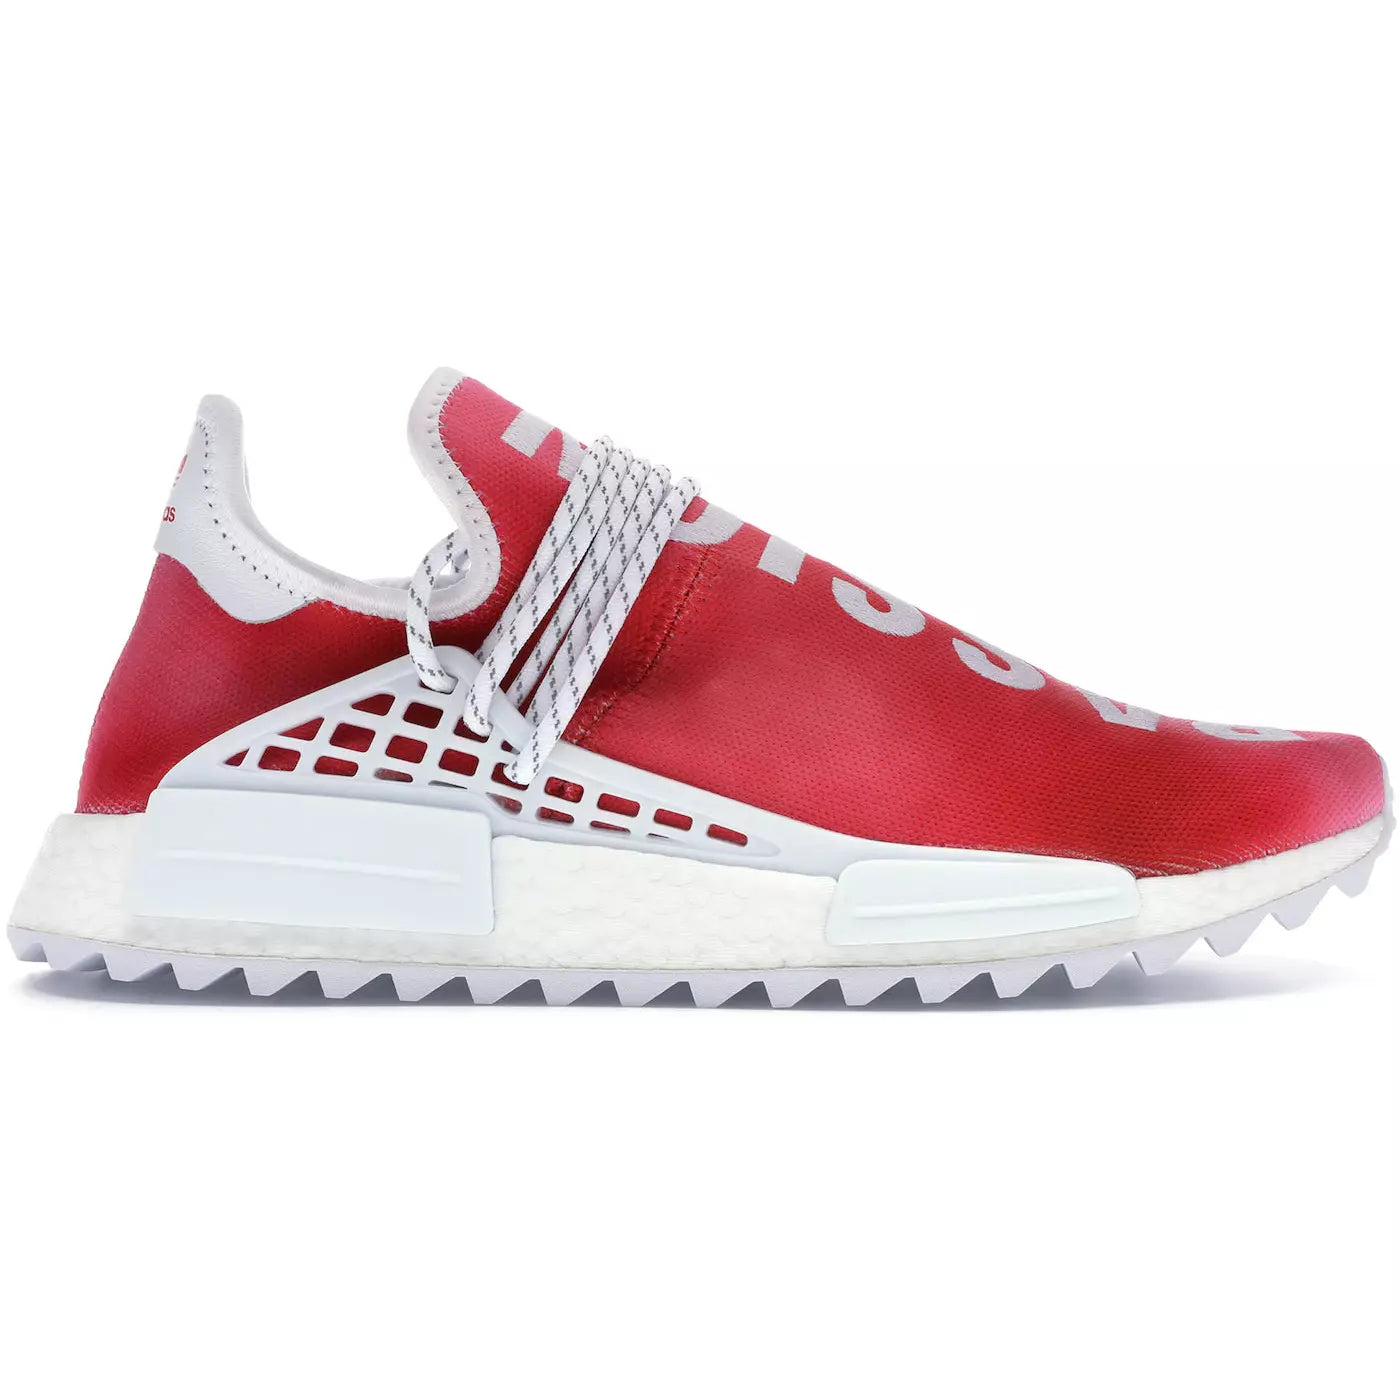 Adidas - Human Race China Pack Passion (Red)